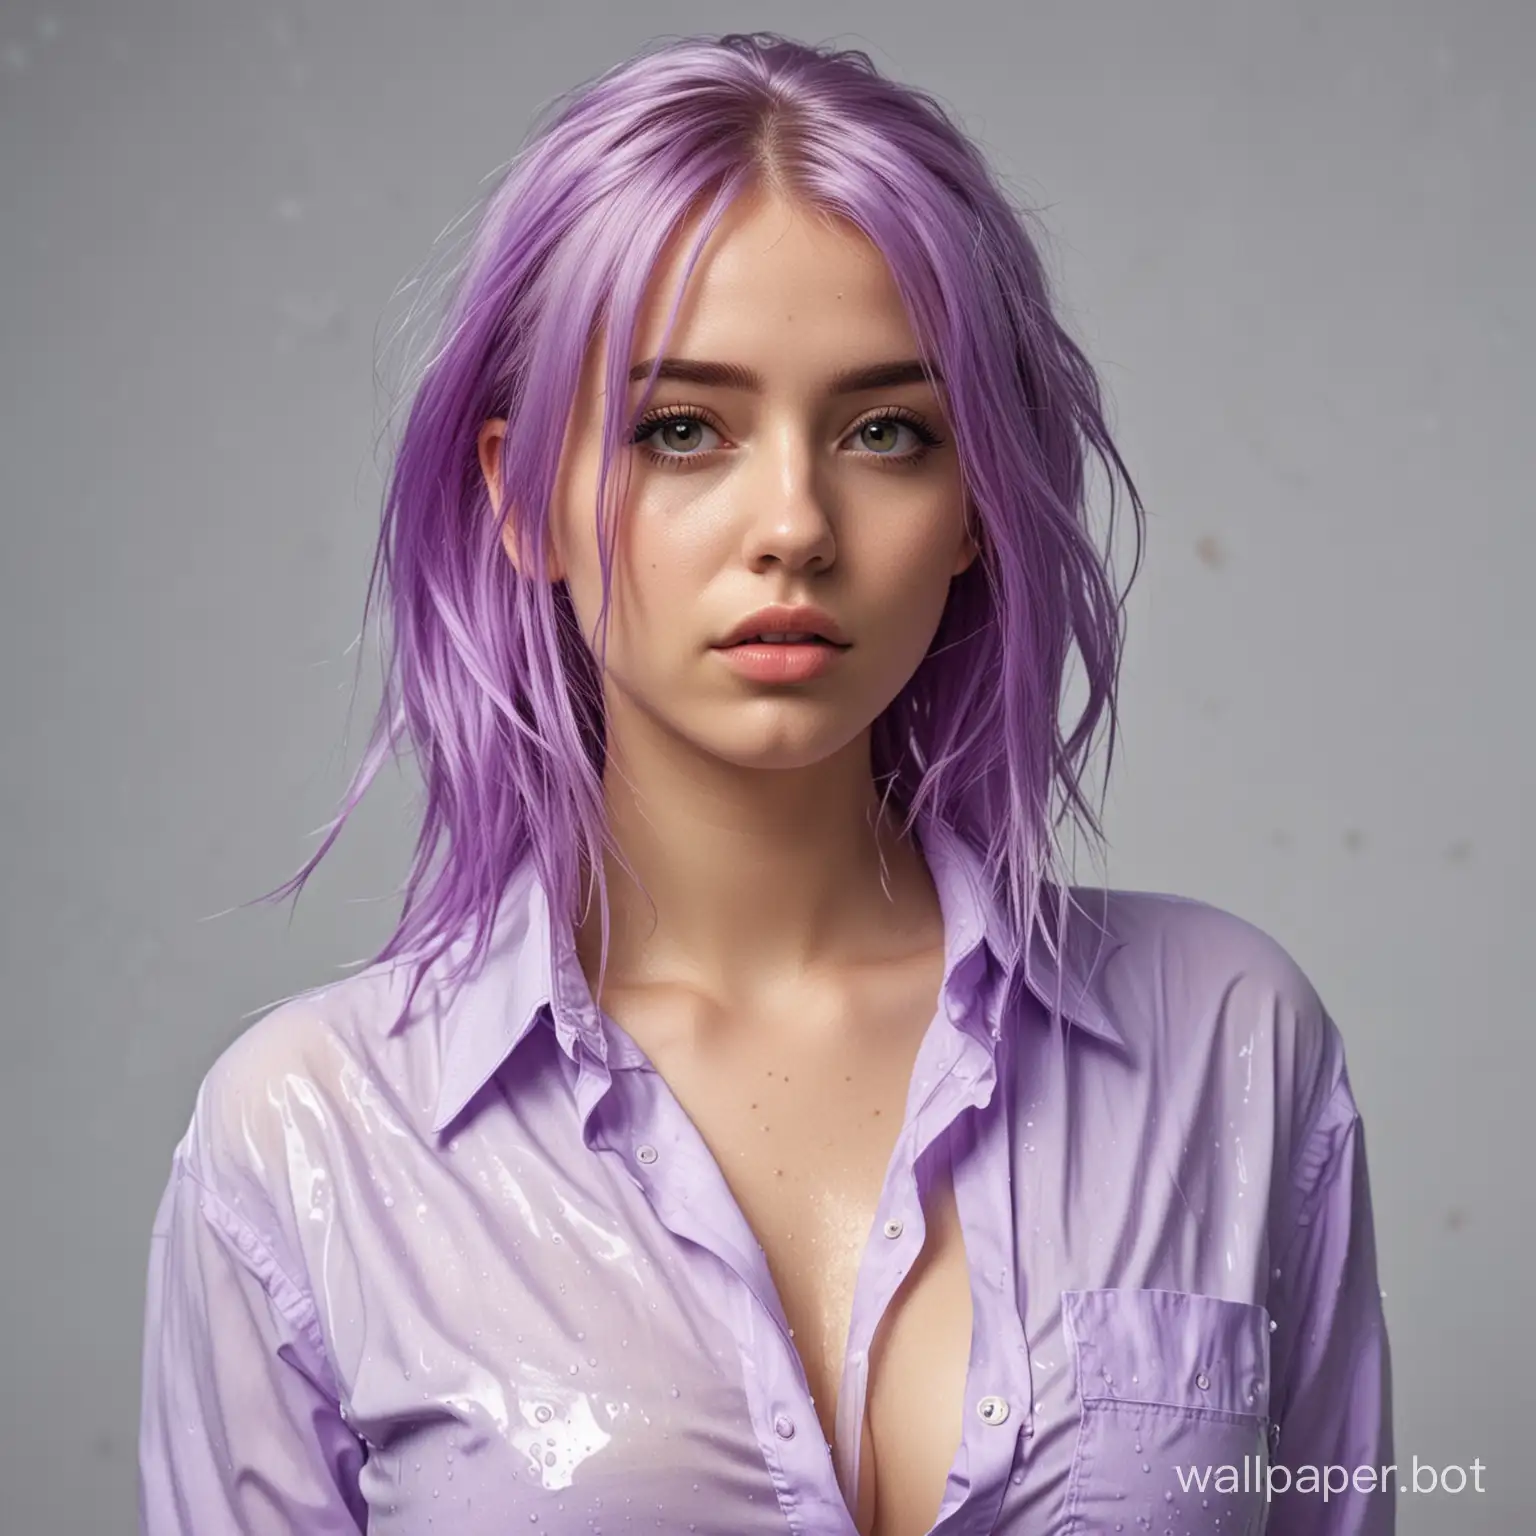 Girl, in a shirt, big chest, wet, violet hair color